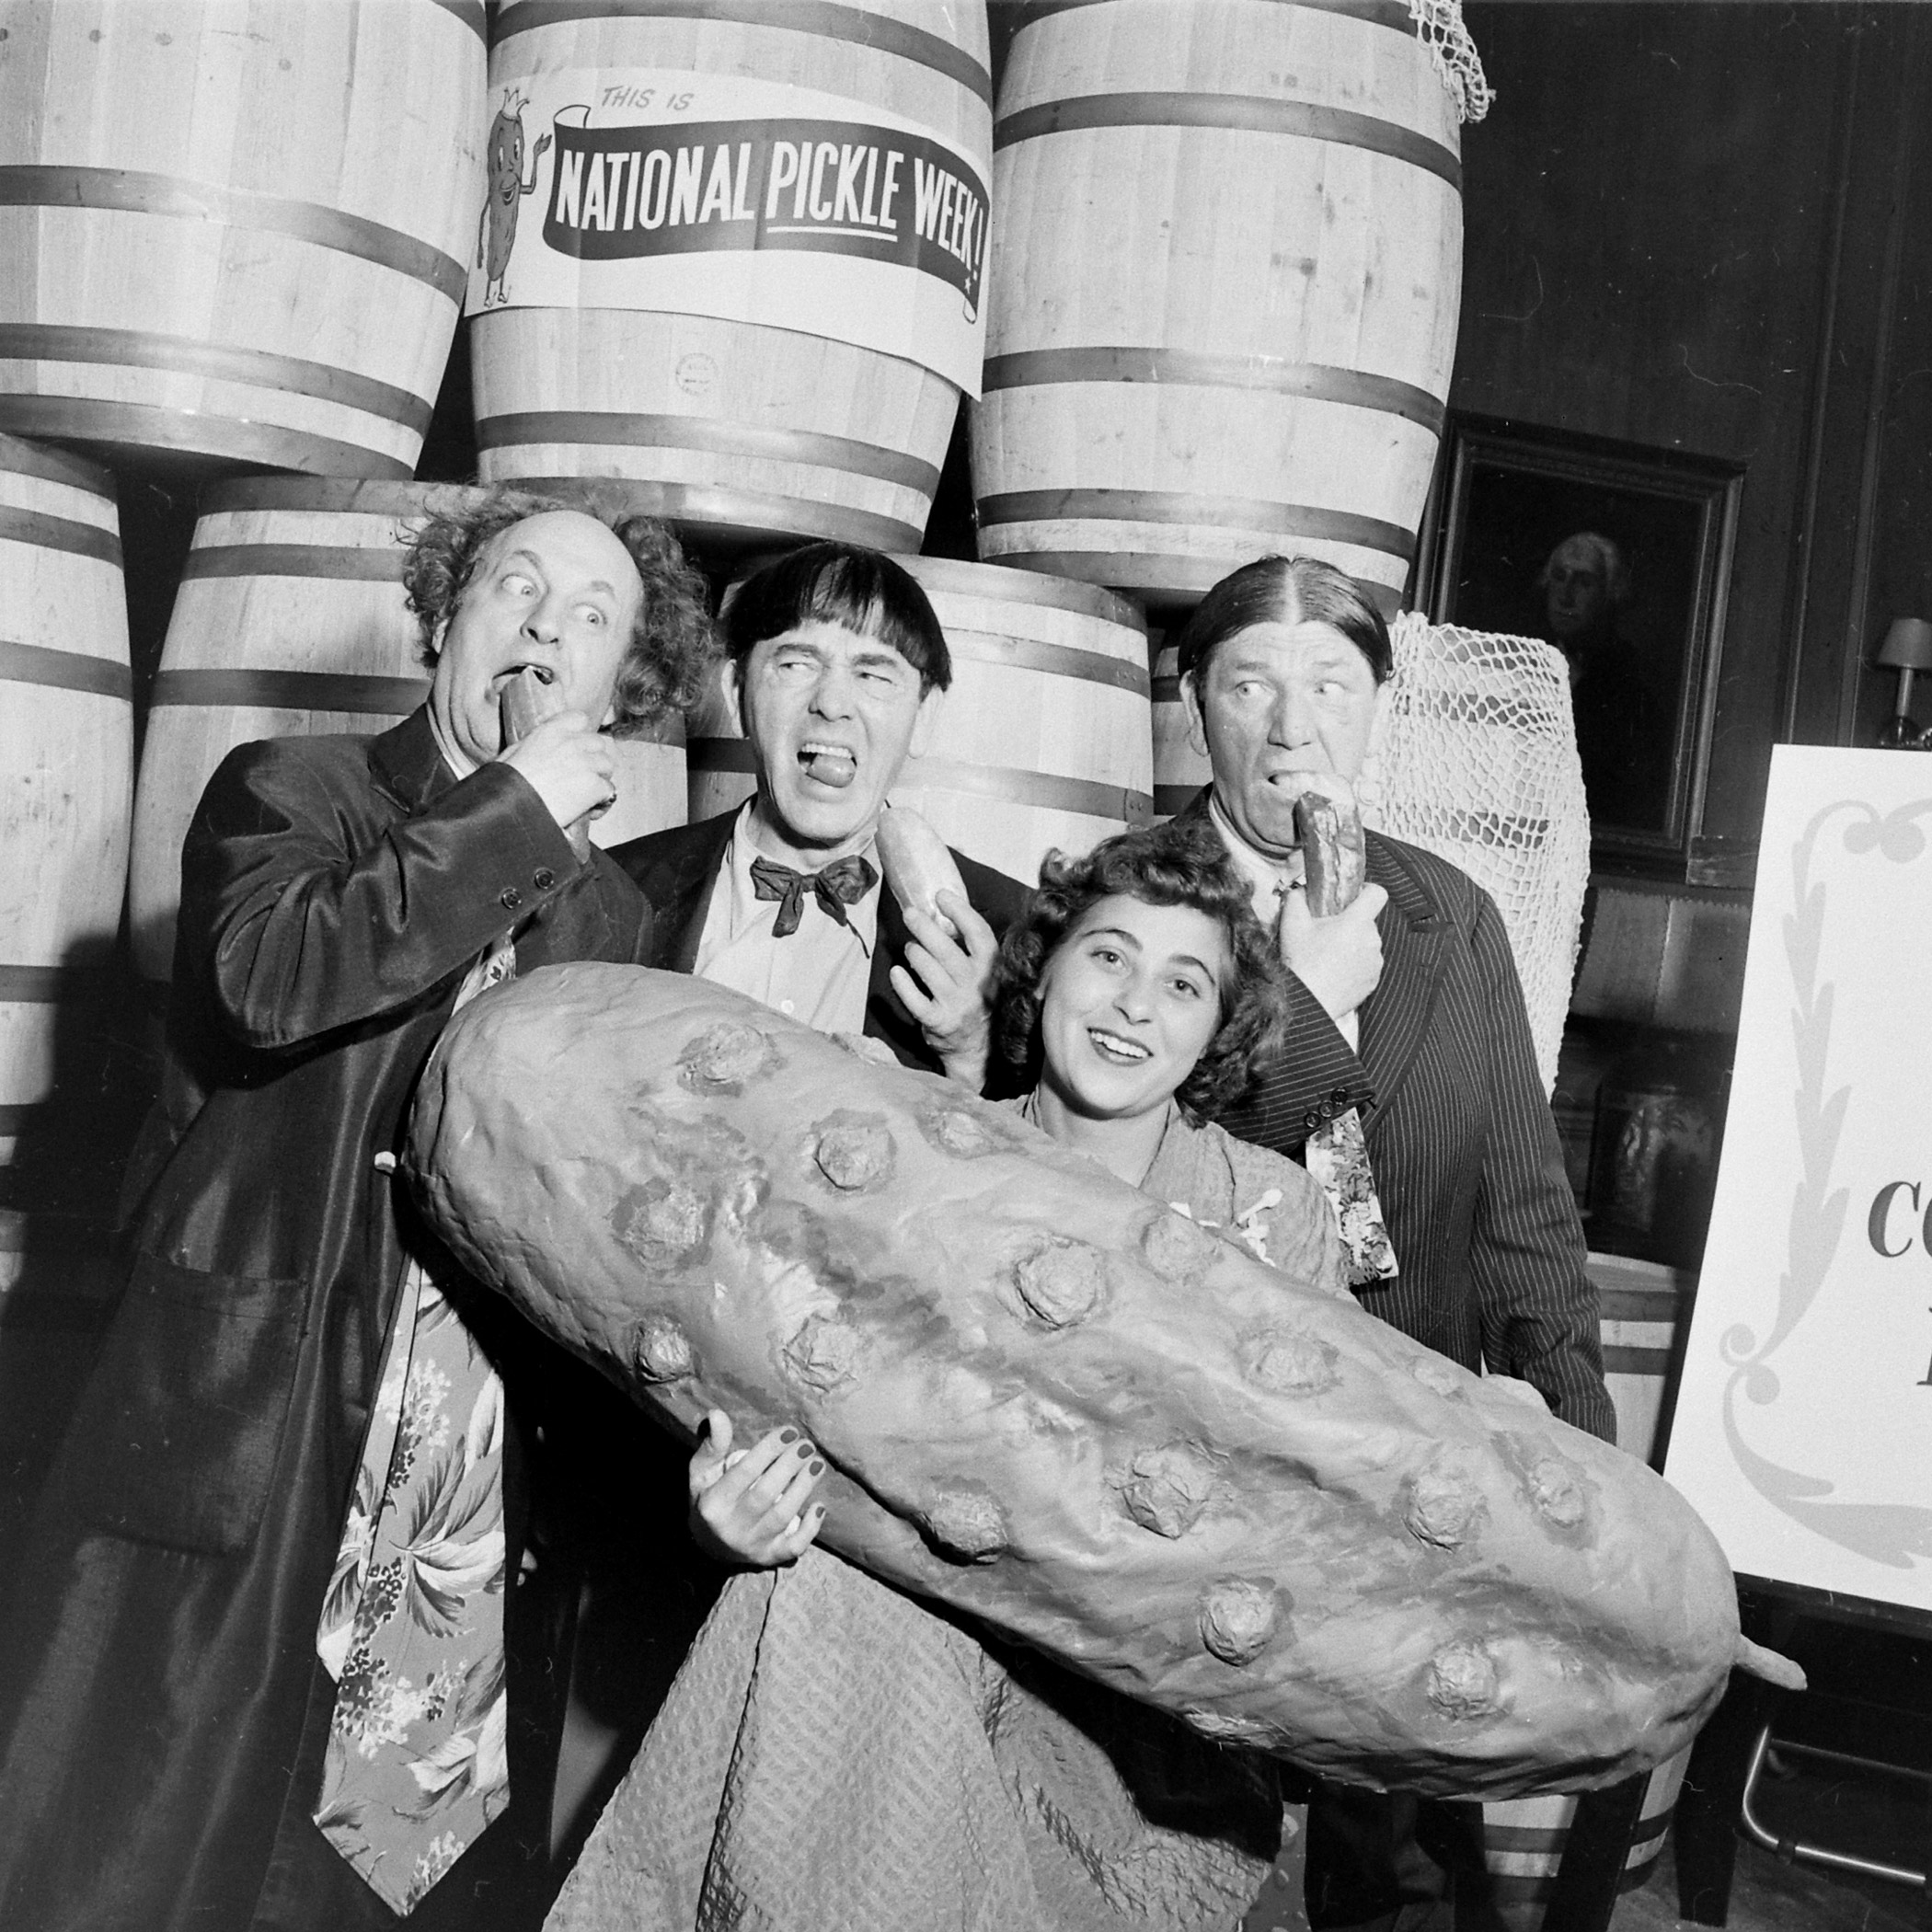 National Pickle Week, 1949. With the Three Stooges.